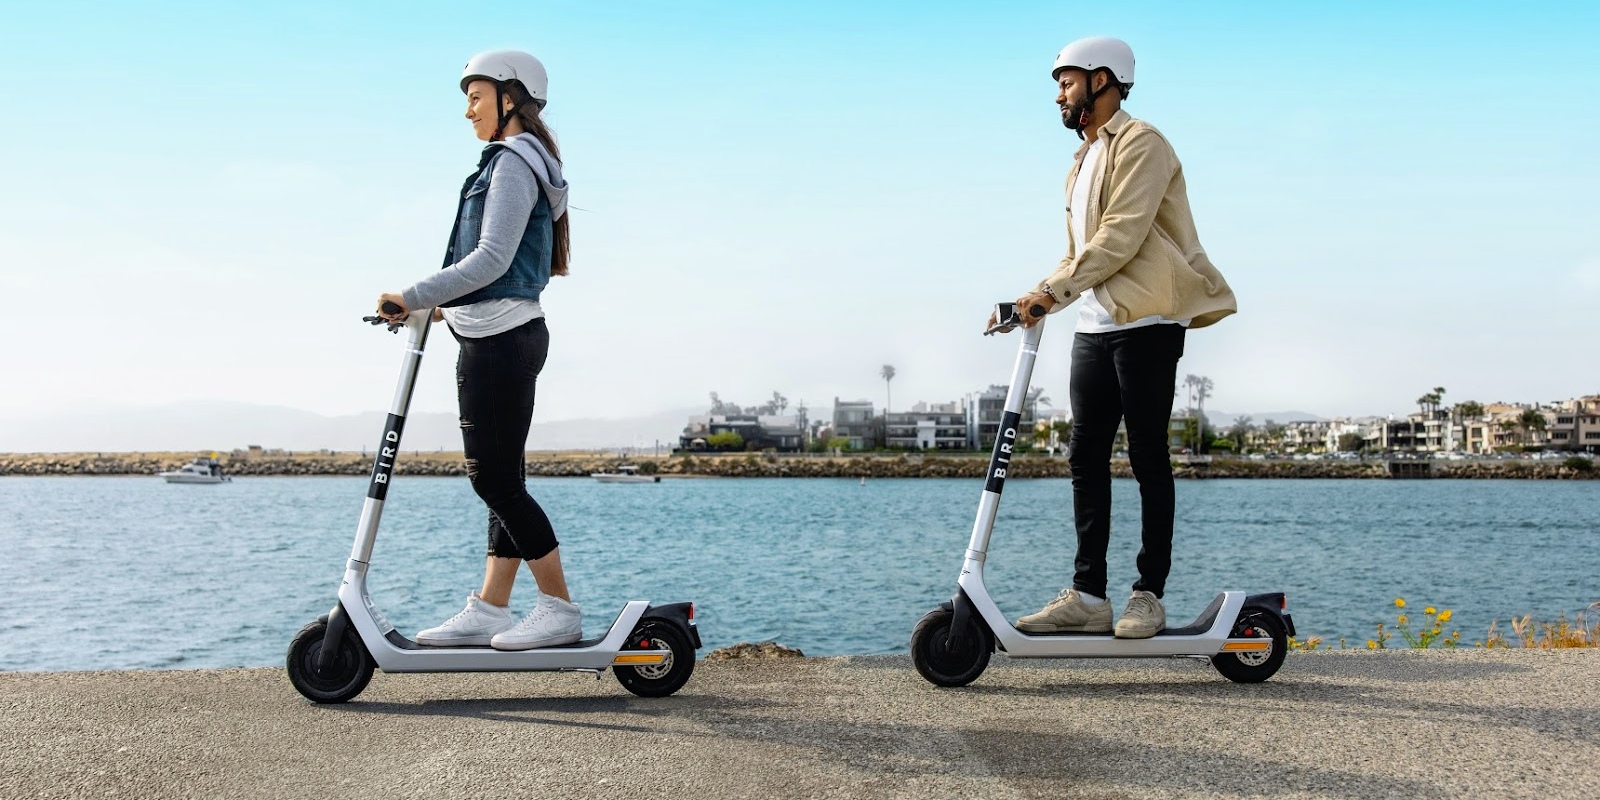 Bird Three released as sharing company's newest electric scooter